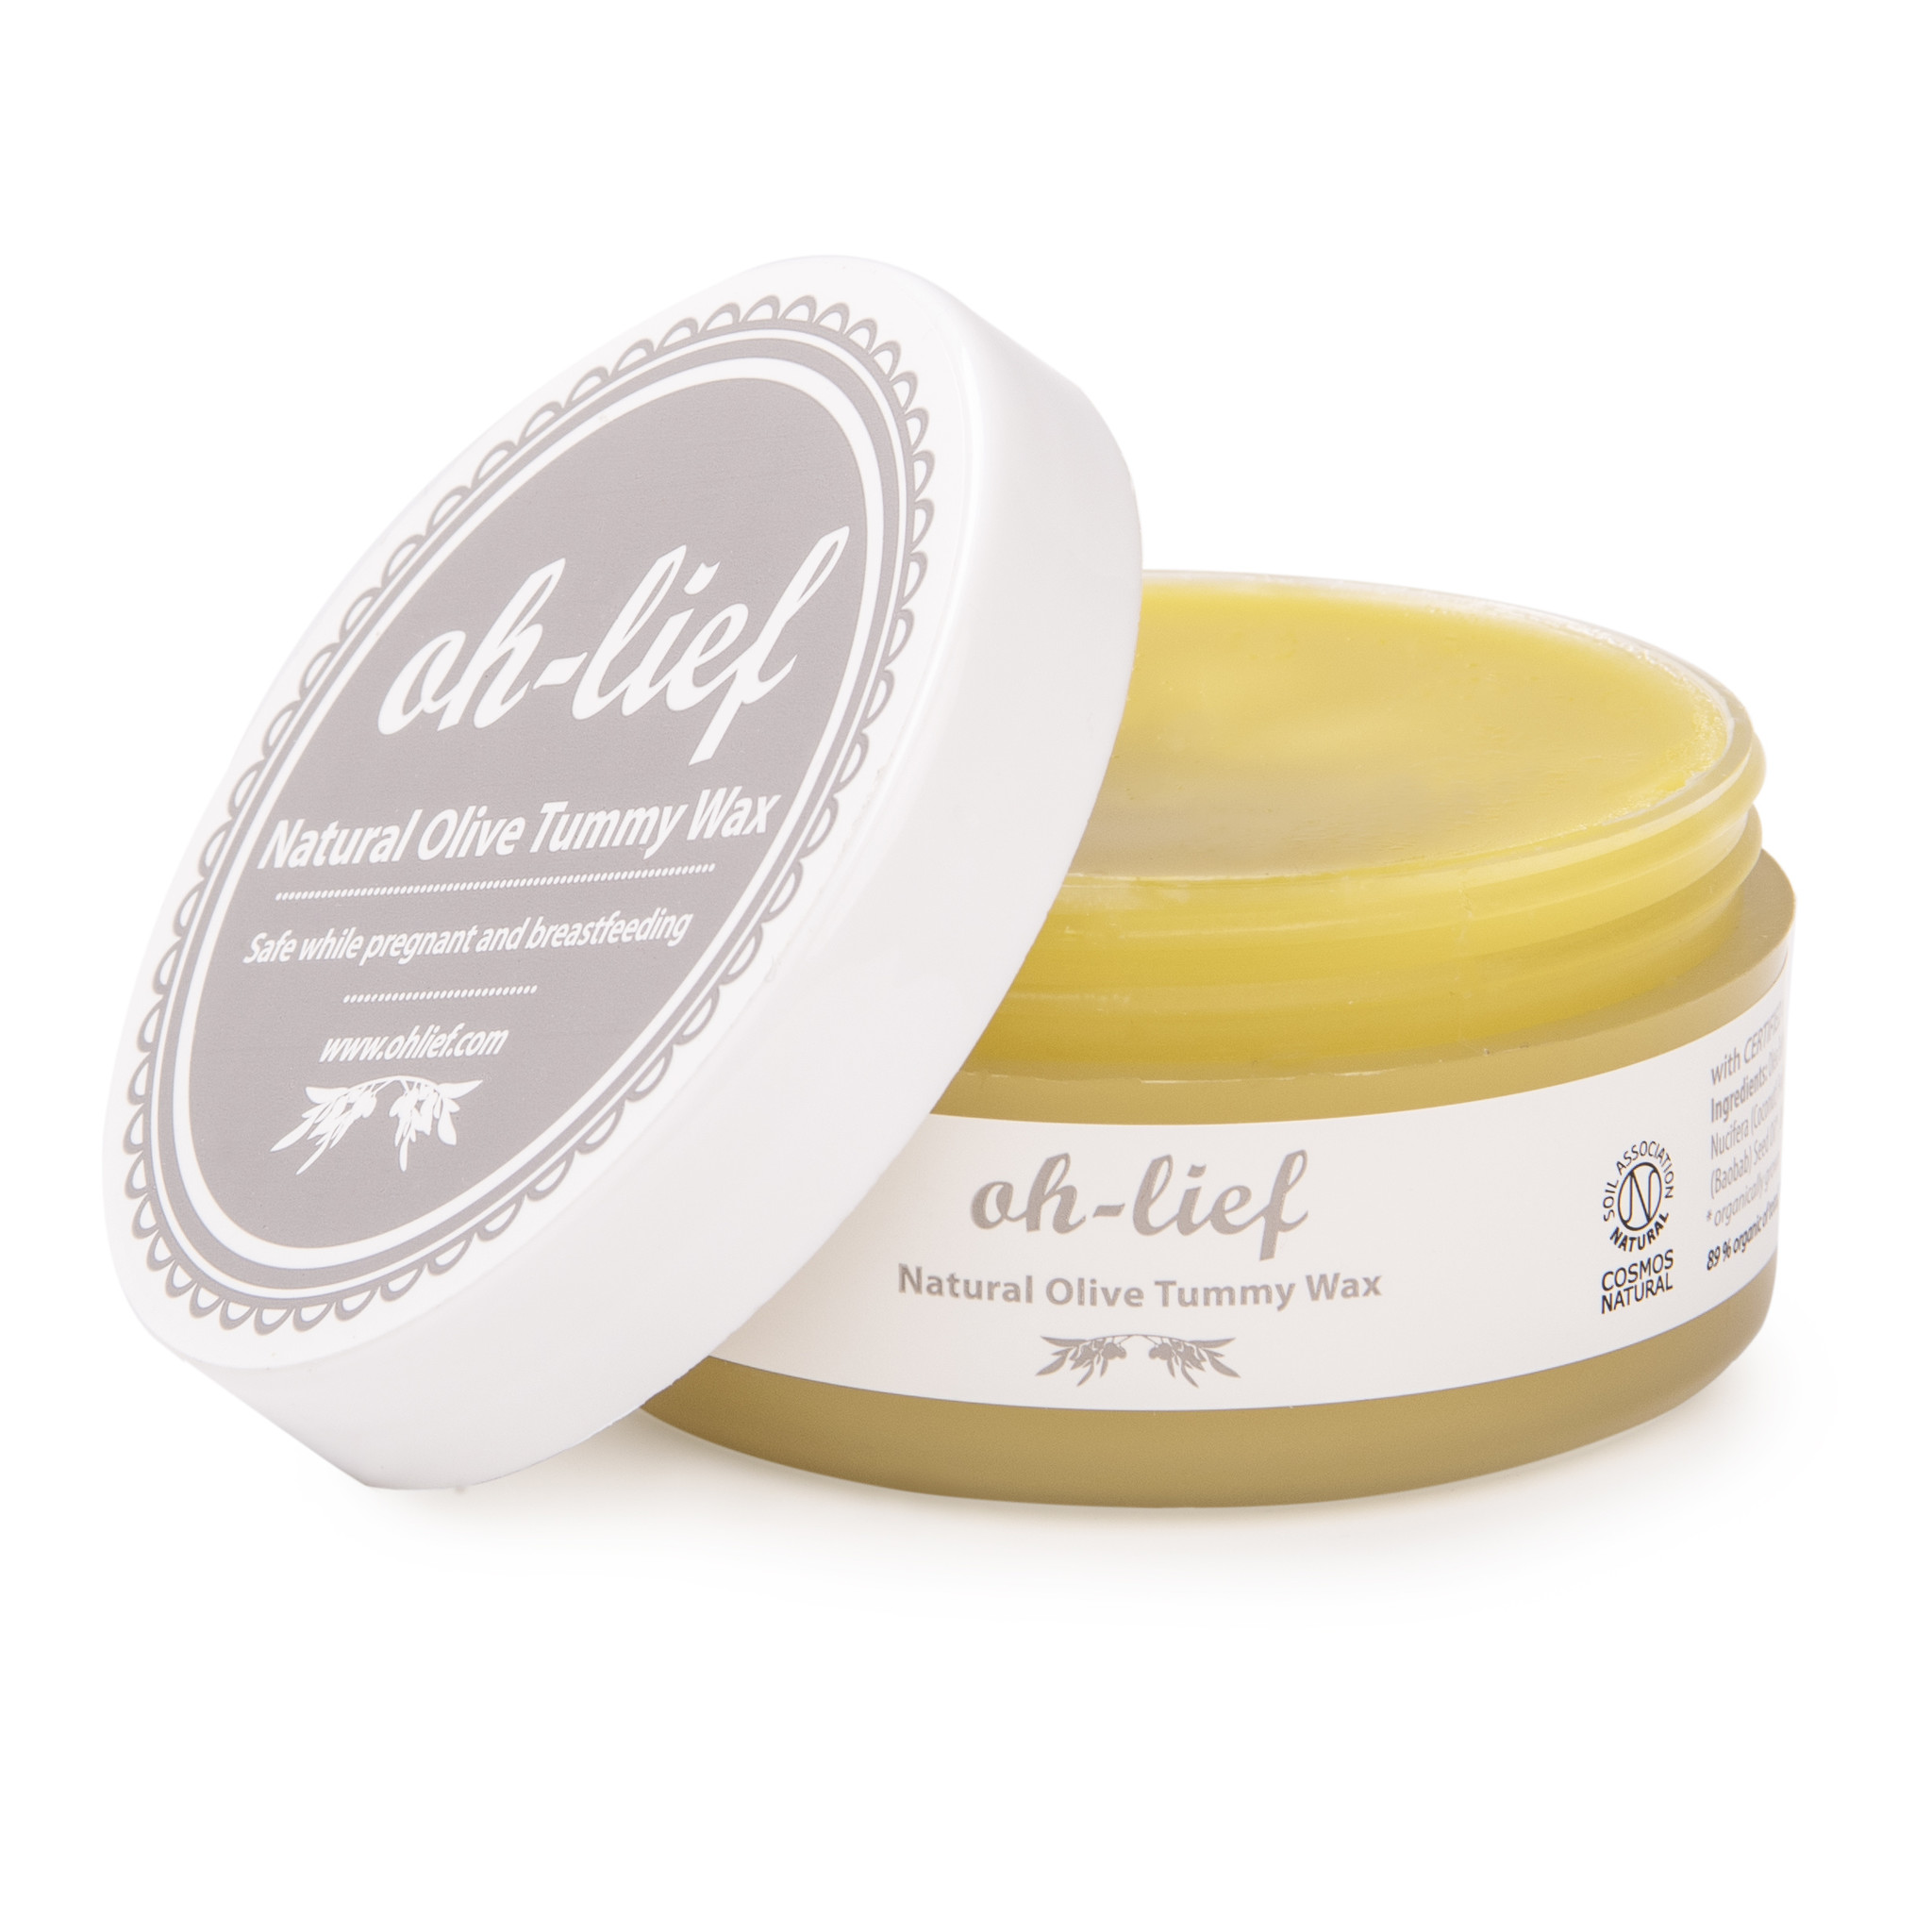 Oh Lief Natural Olive Tummy Wax